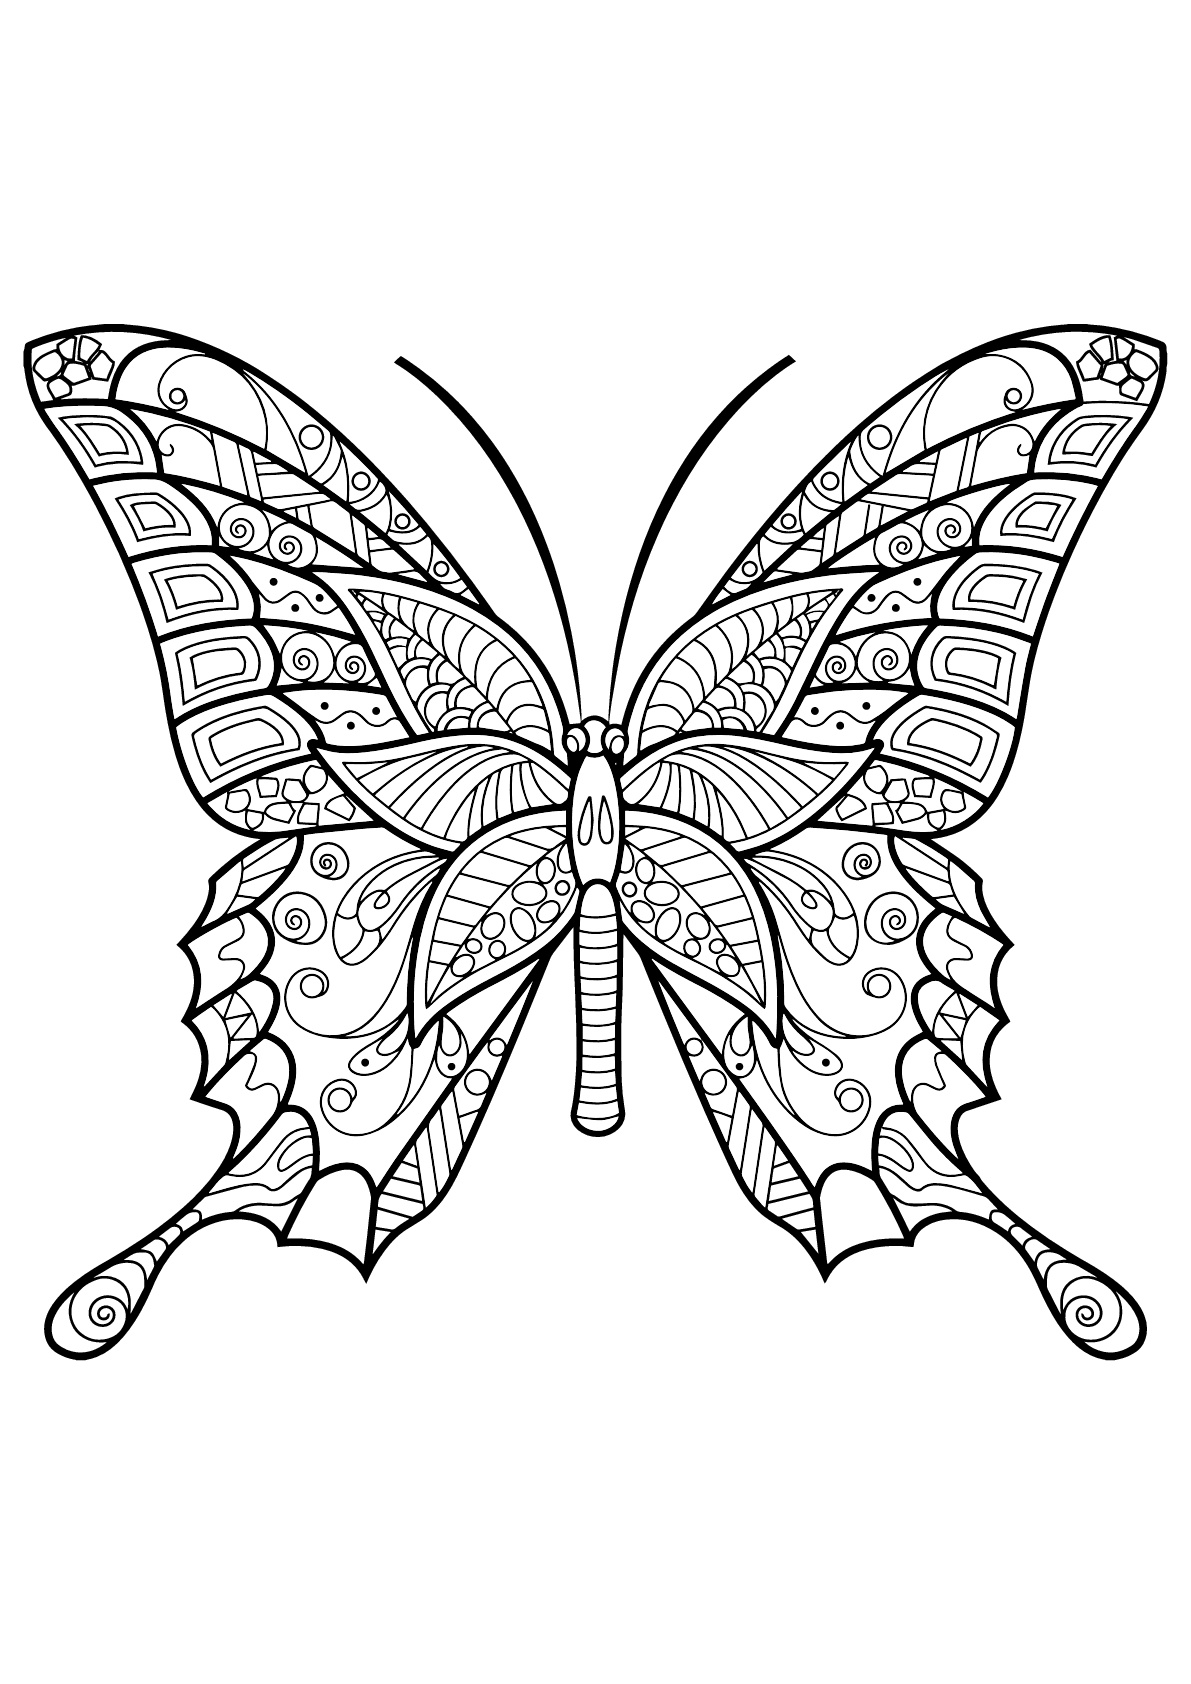 Butterfly beautiful patterns 6 - Butterflies & insects Adult Coloring Pages